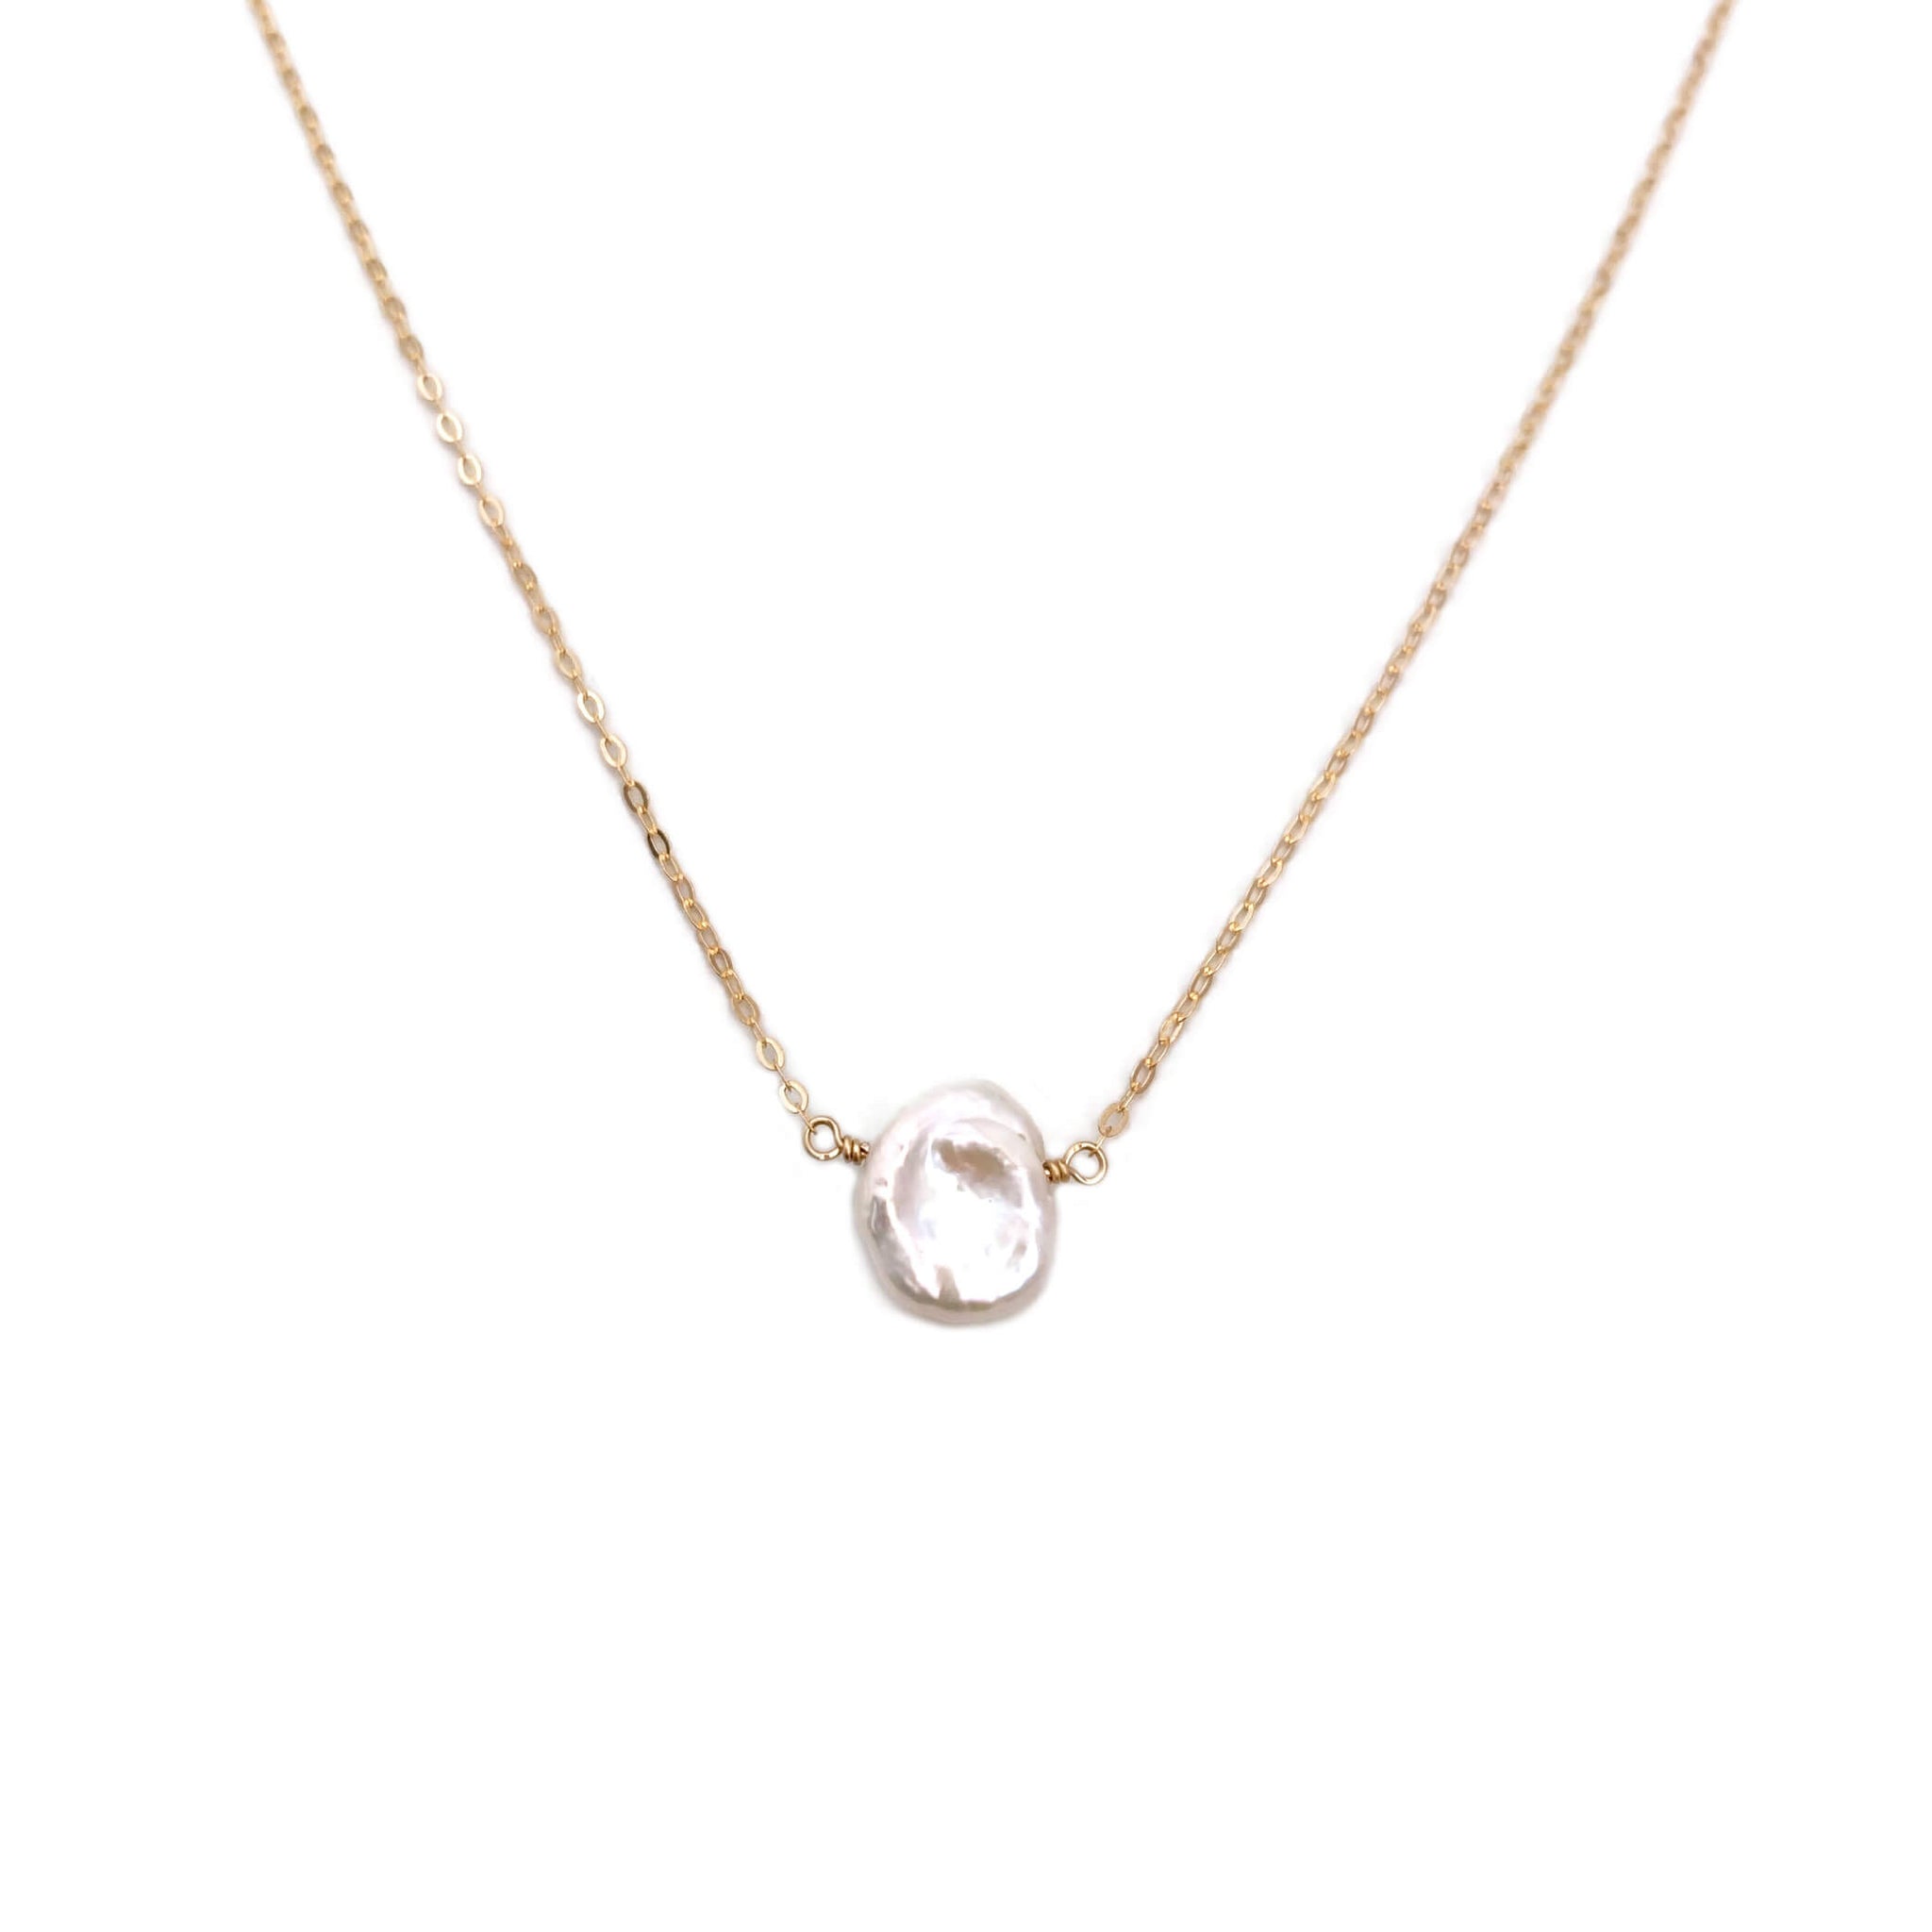 This real pearl necklace is made with a single genuine freshwater keshi pearl with adjustable chain.